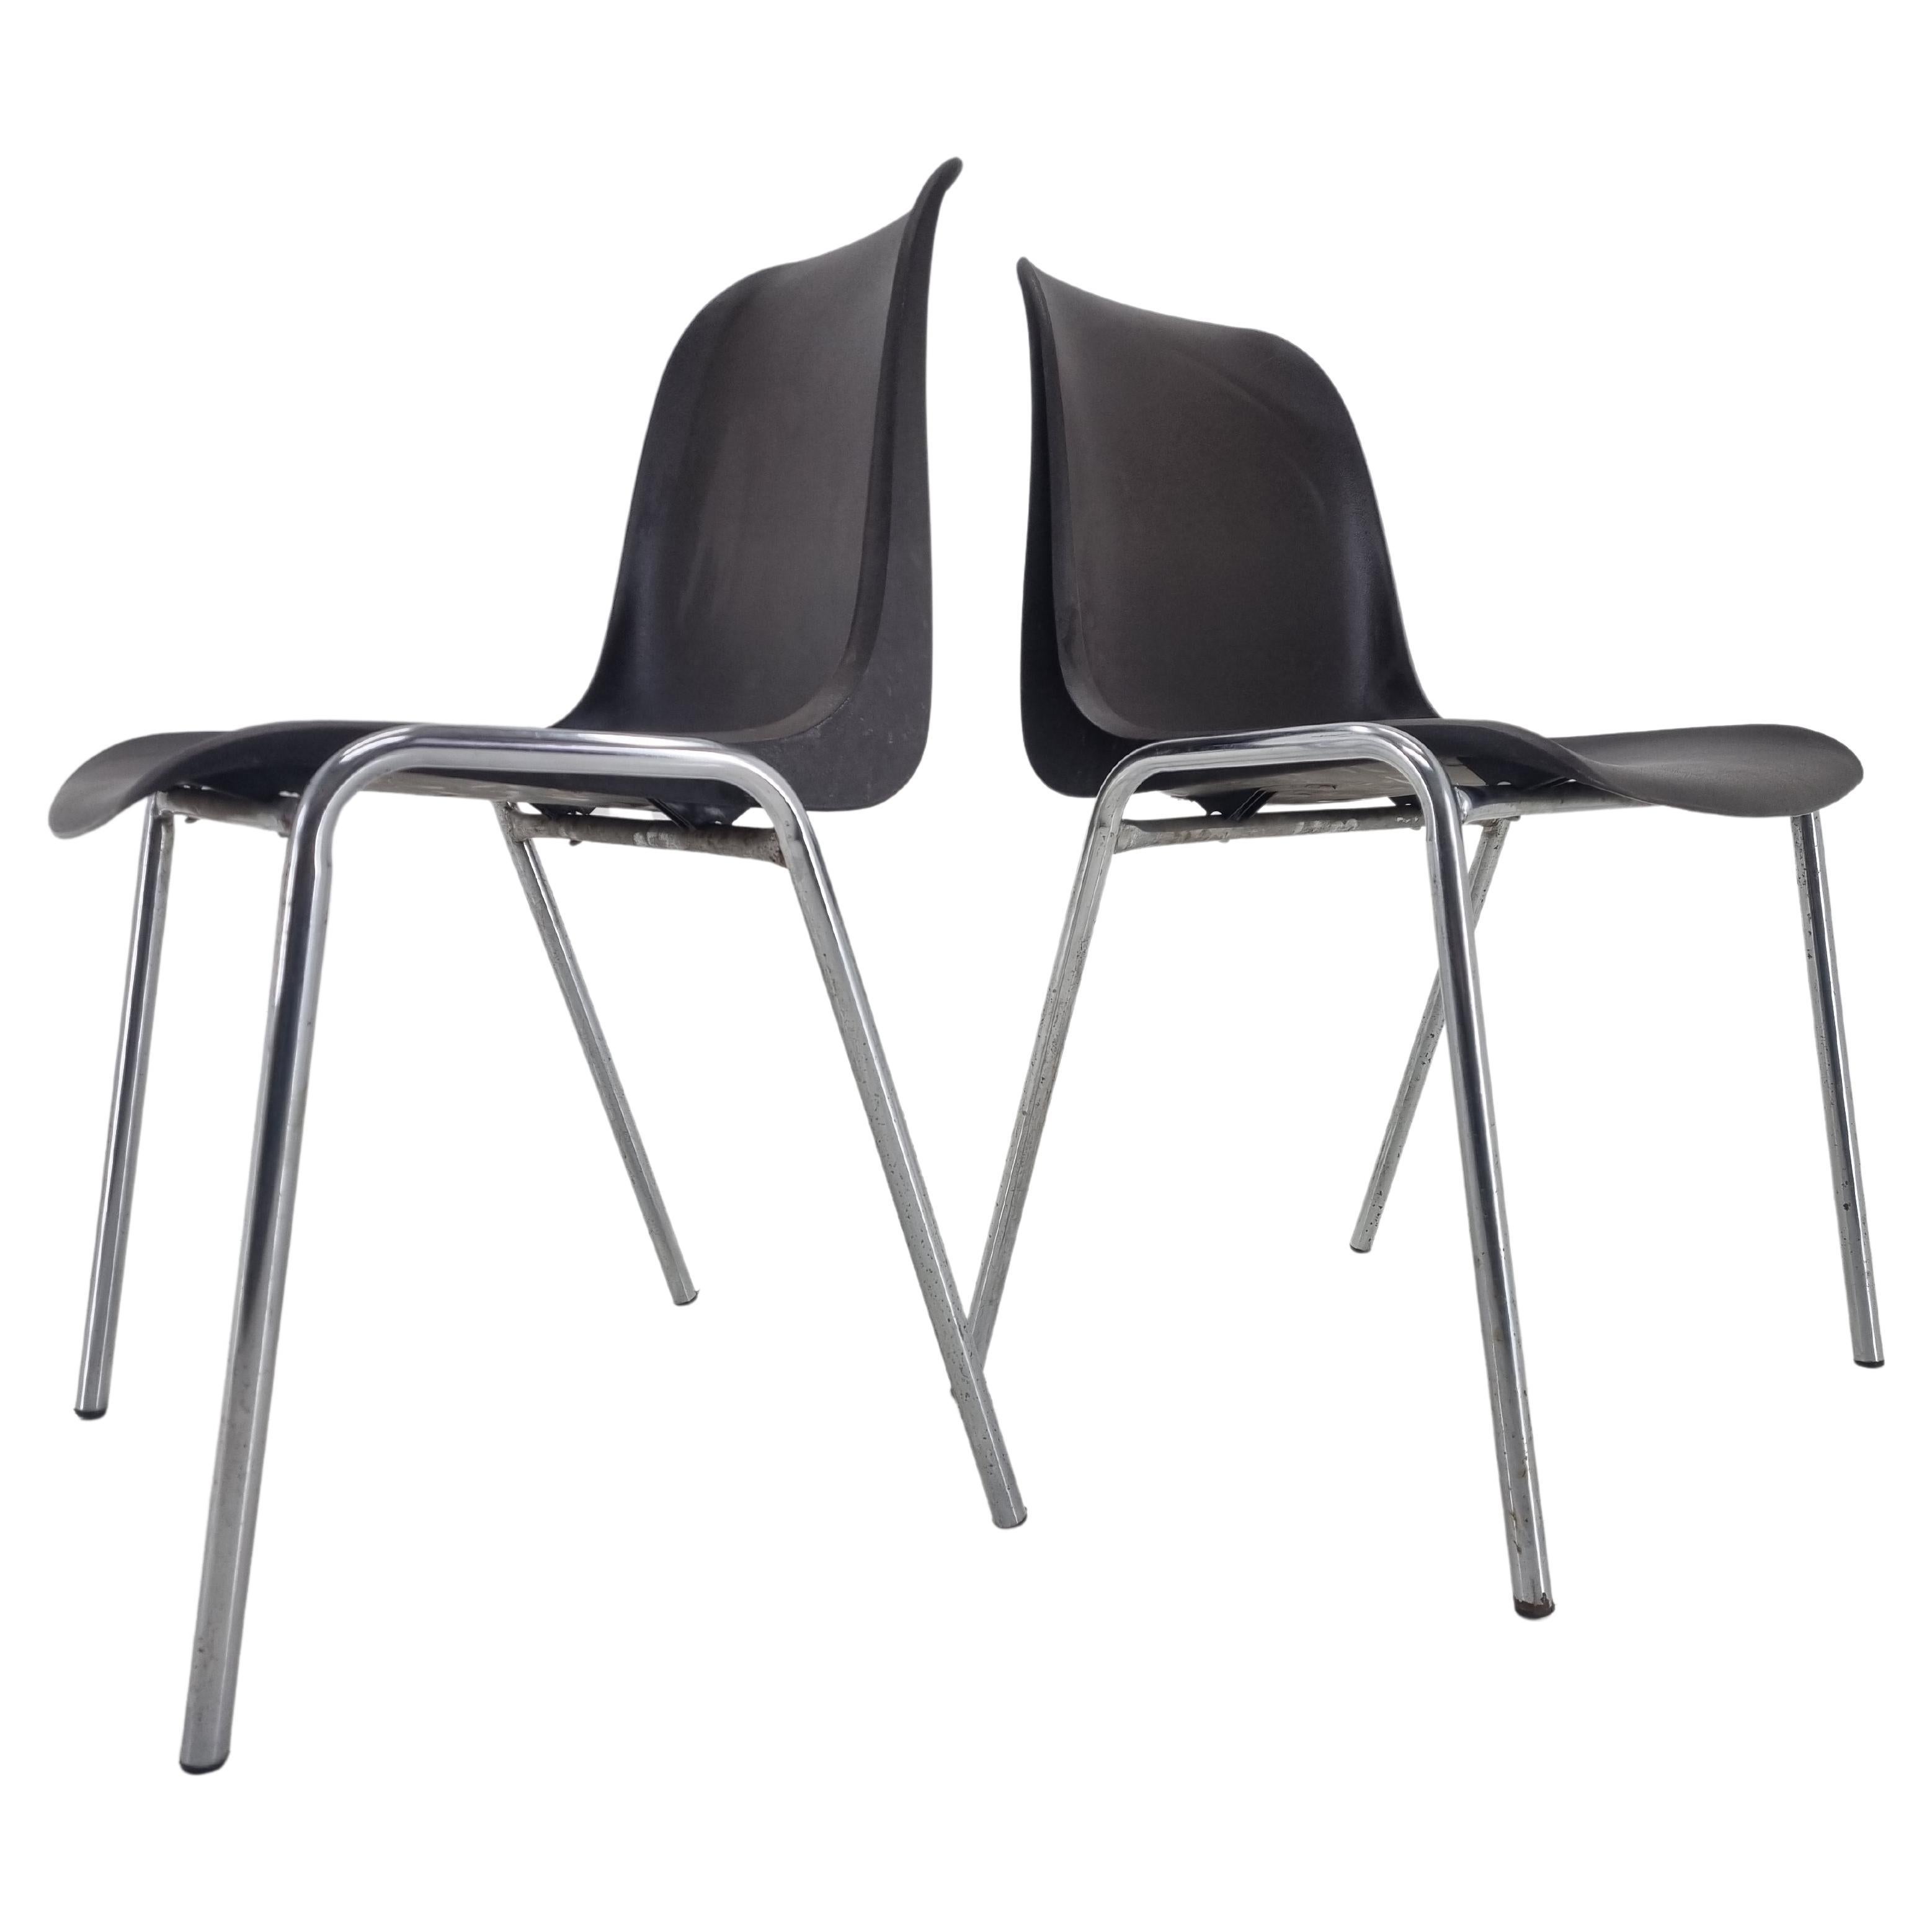 Set of 2 Midcentury Chairs Europa Designed by Helmut Starke, 1990s